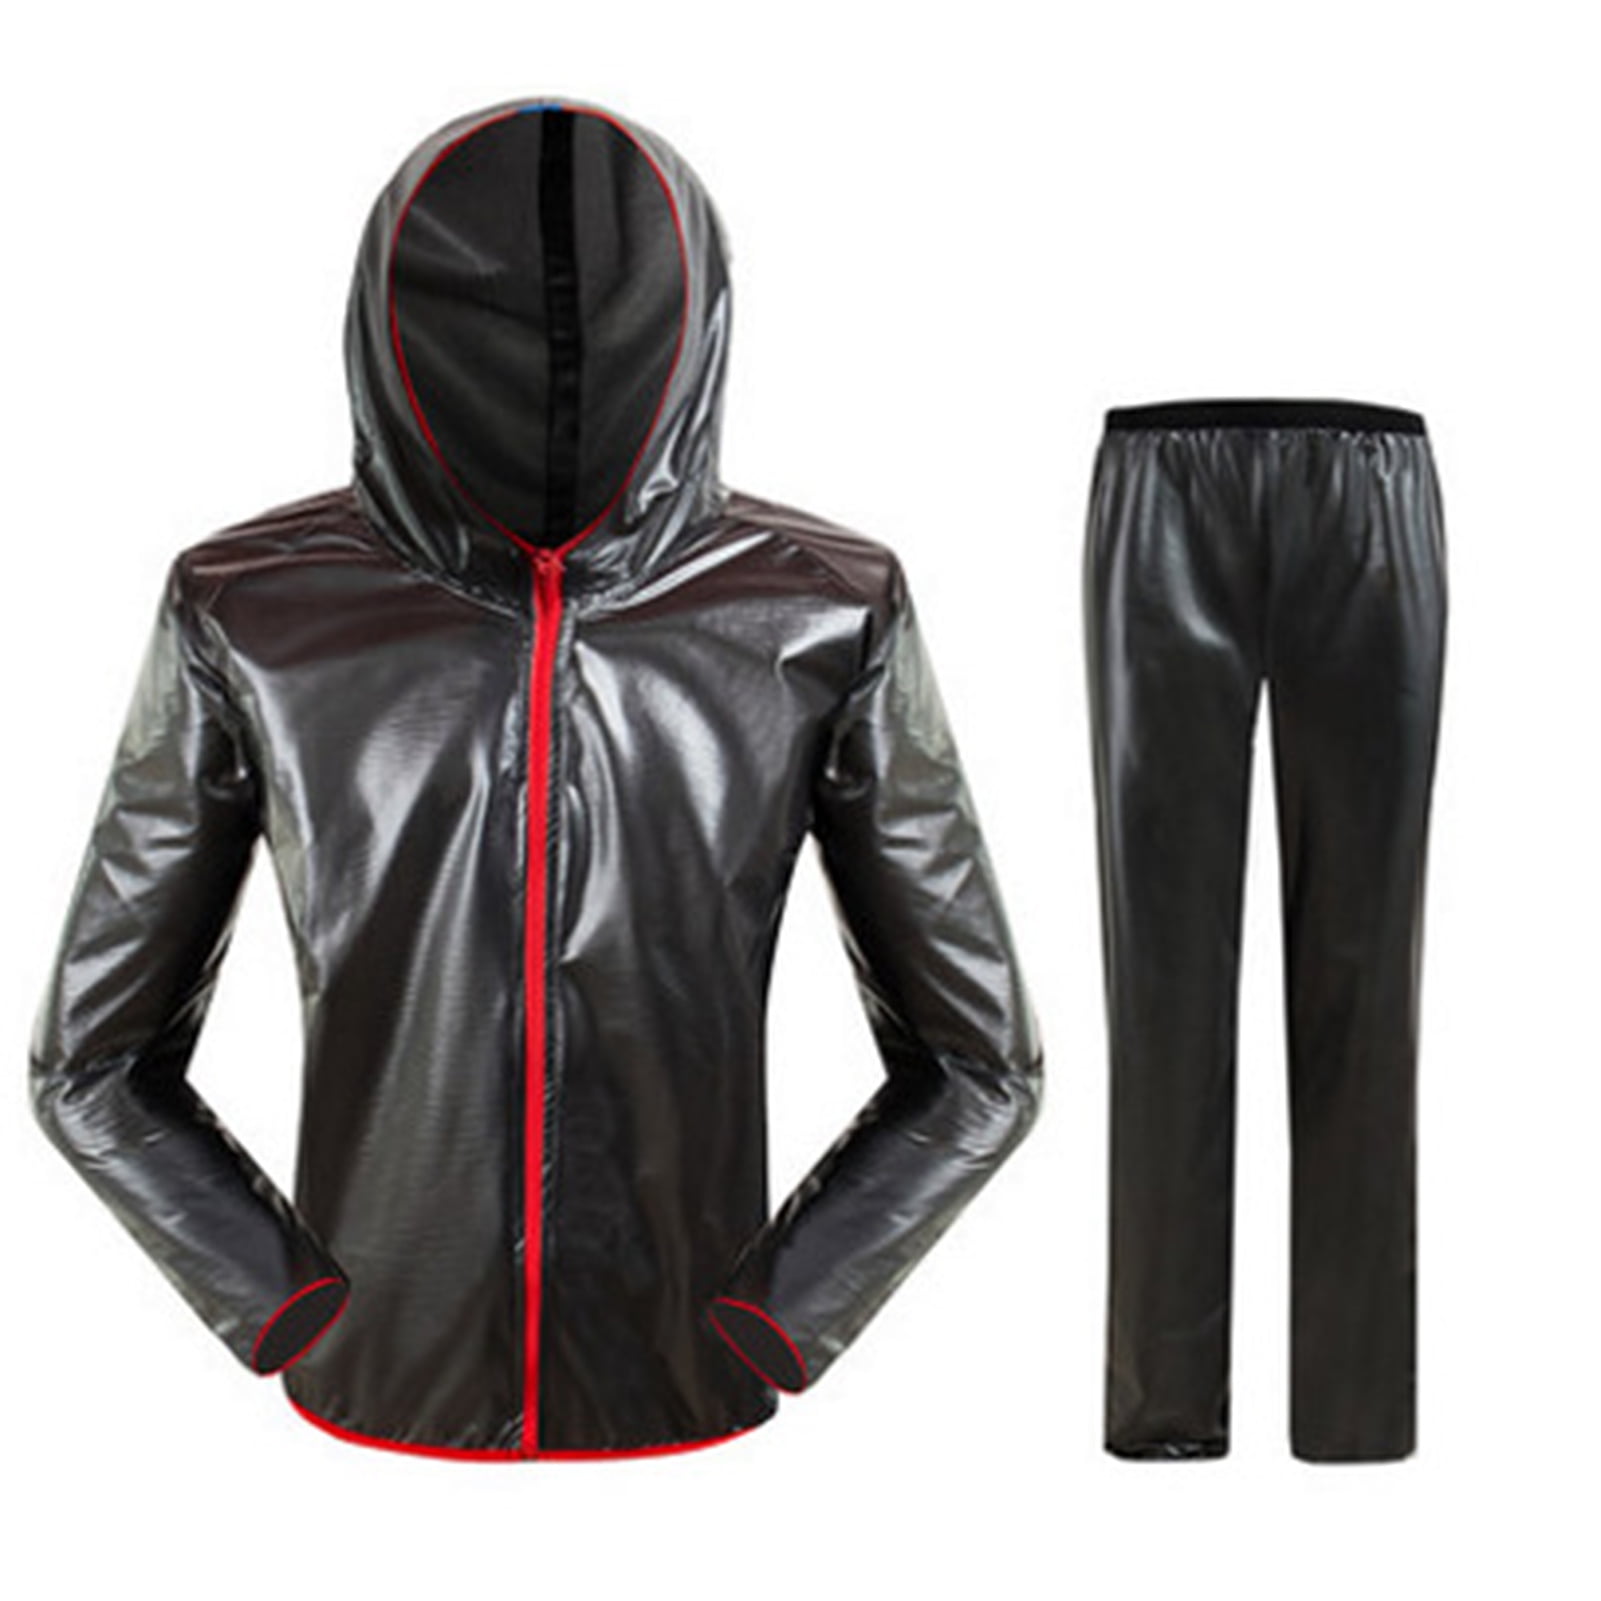 Details about   Thermal Cycling Jacket Winter Bicycle Clothing Windproof Sport Coat For MTB Bike